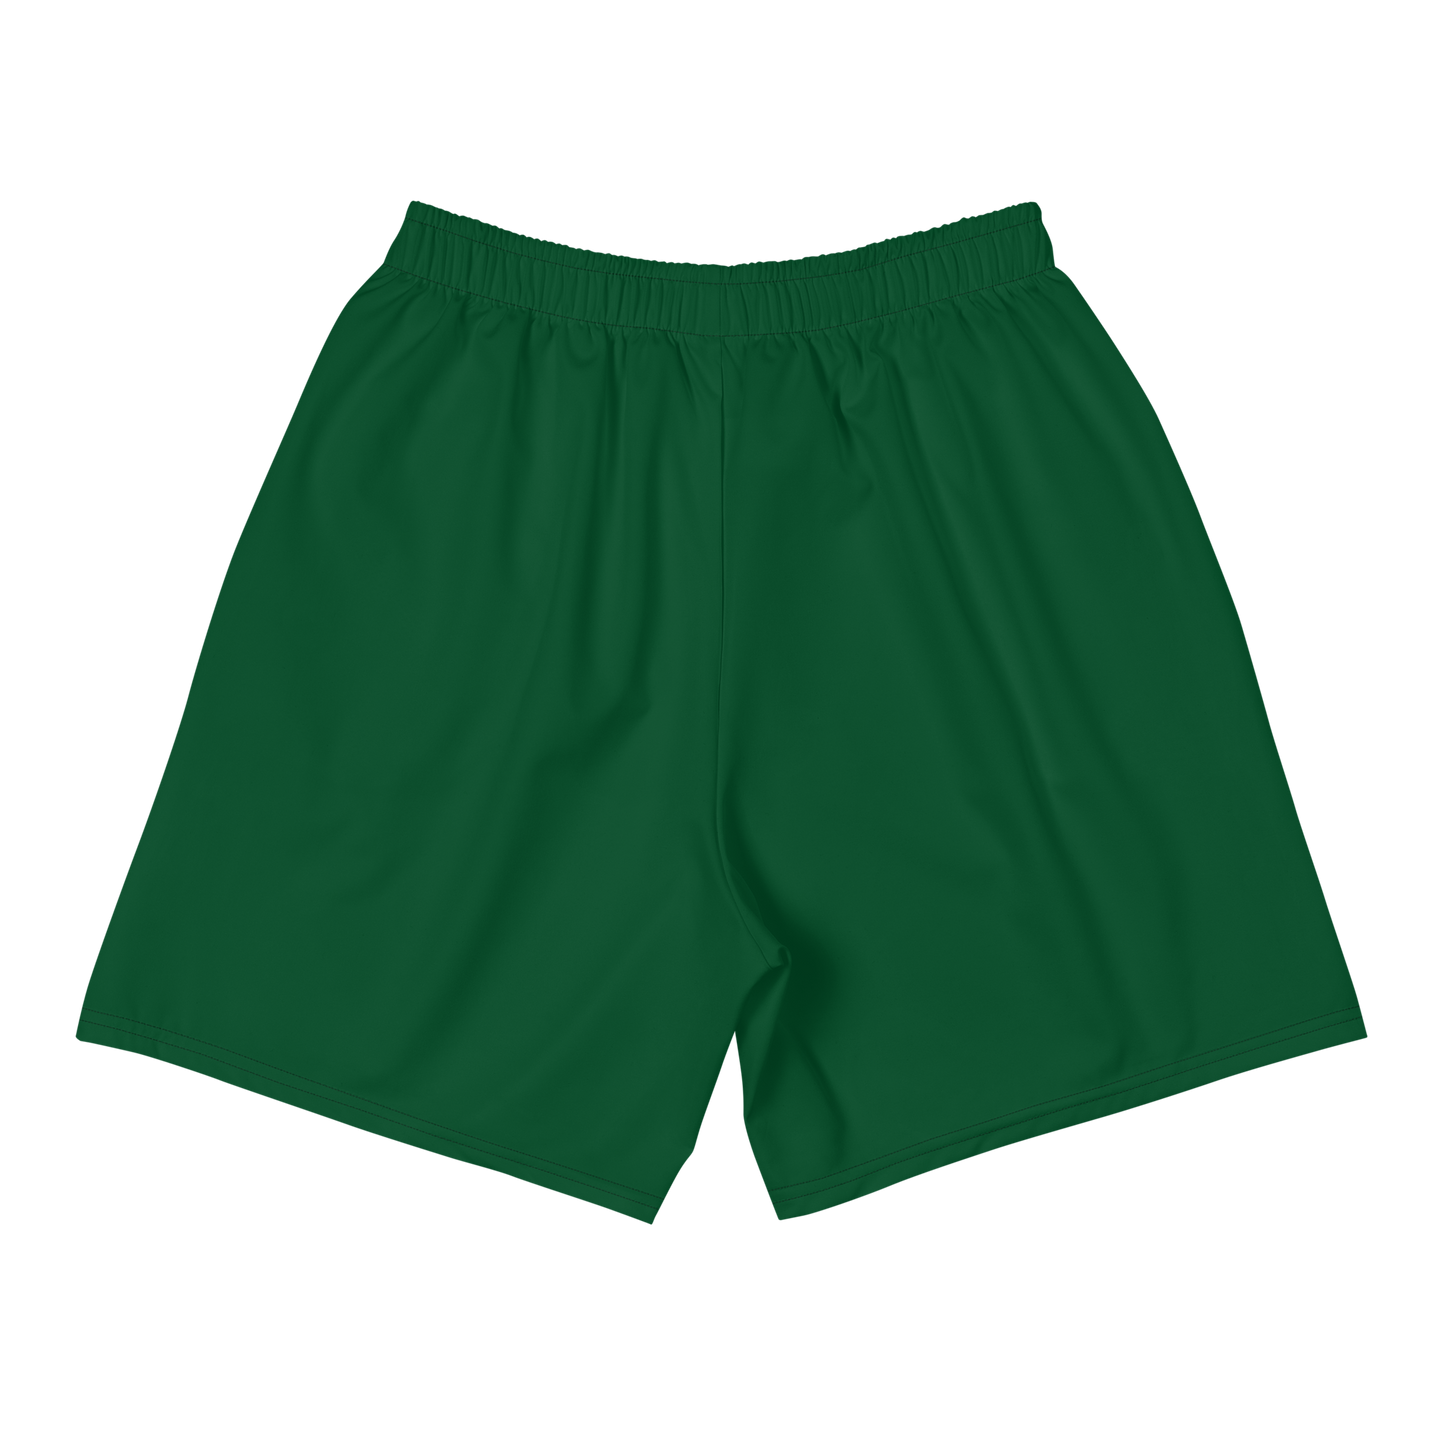 LARRY MOORE ATHLETIC SHORTS